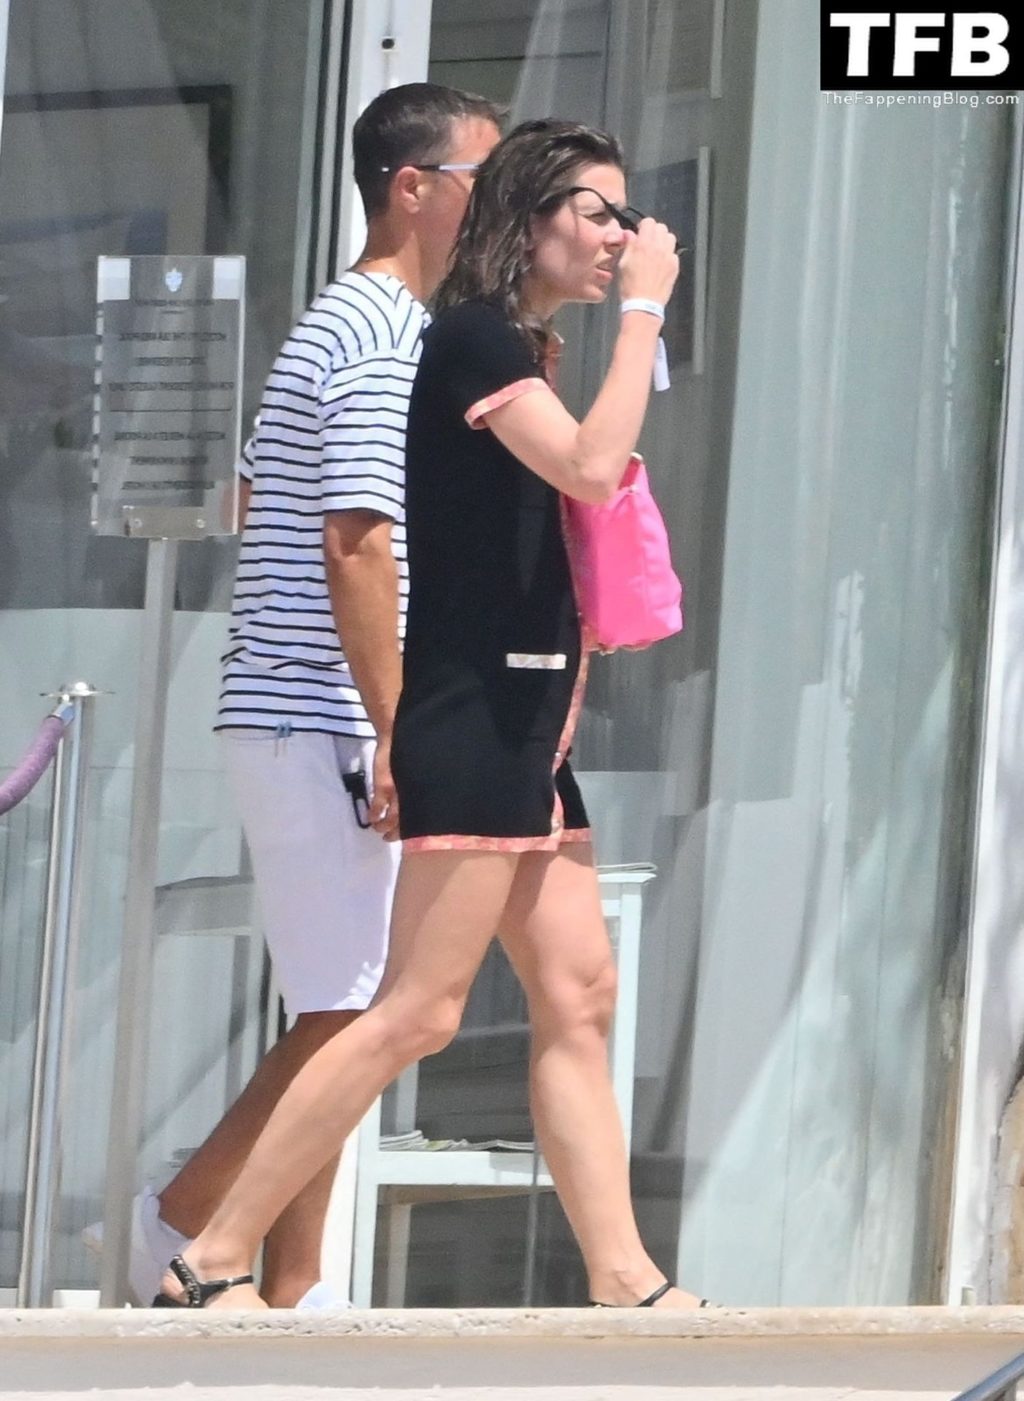 Charlotte Casiraghi Sexy The Fappening Blog 65 1024x1401 - Charlotte Casiraghi is Seen in a Black Swimsuit at Eden Roc Hotel (69 Photos)